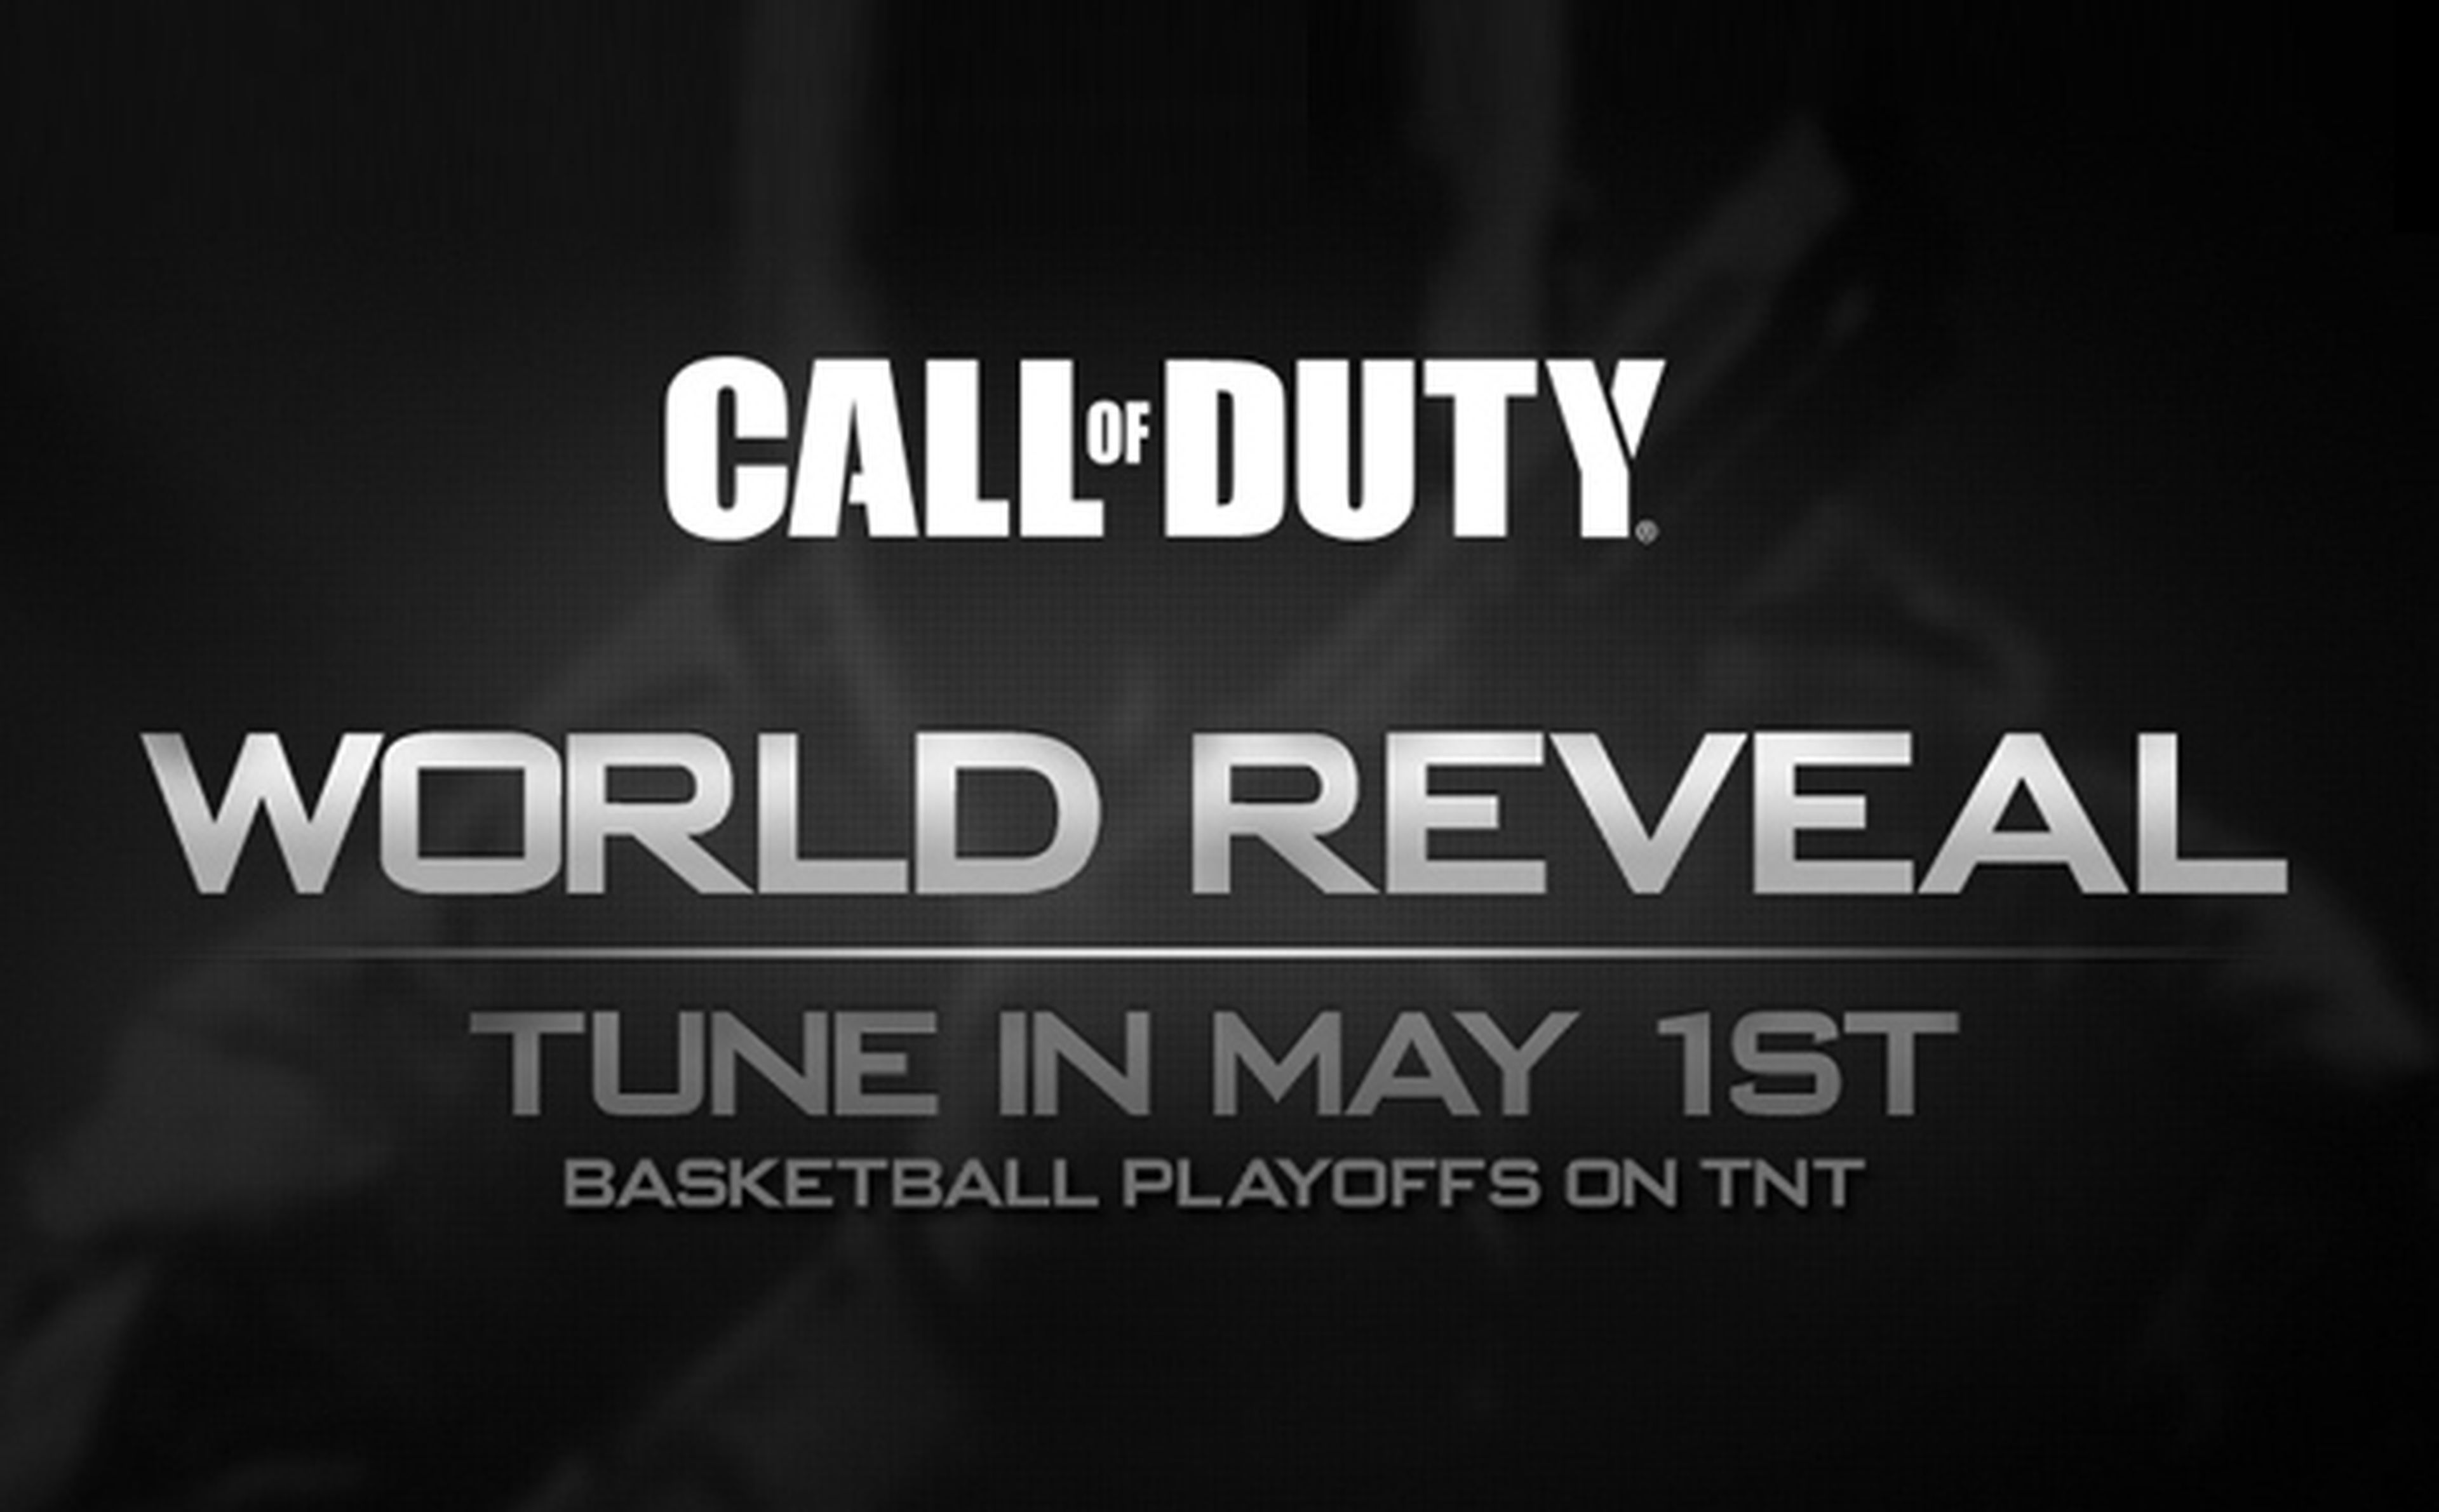 ¿Call of Duty Eclipse o Black Ops 2?